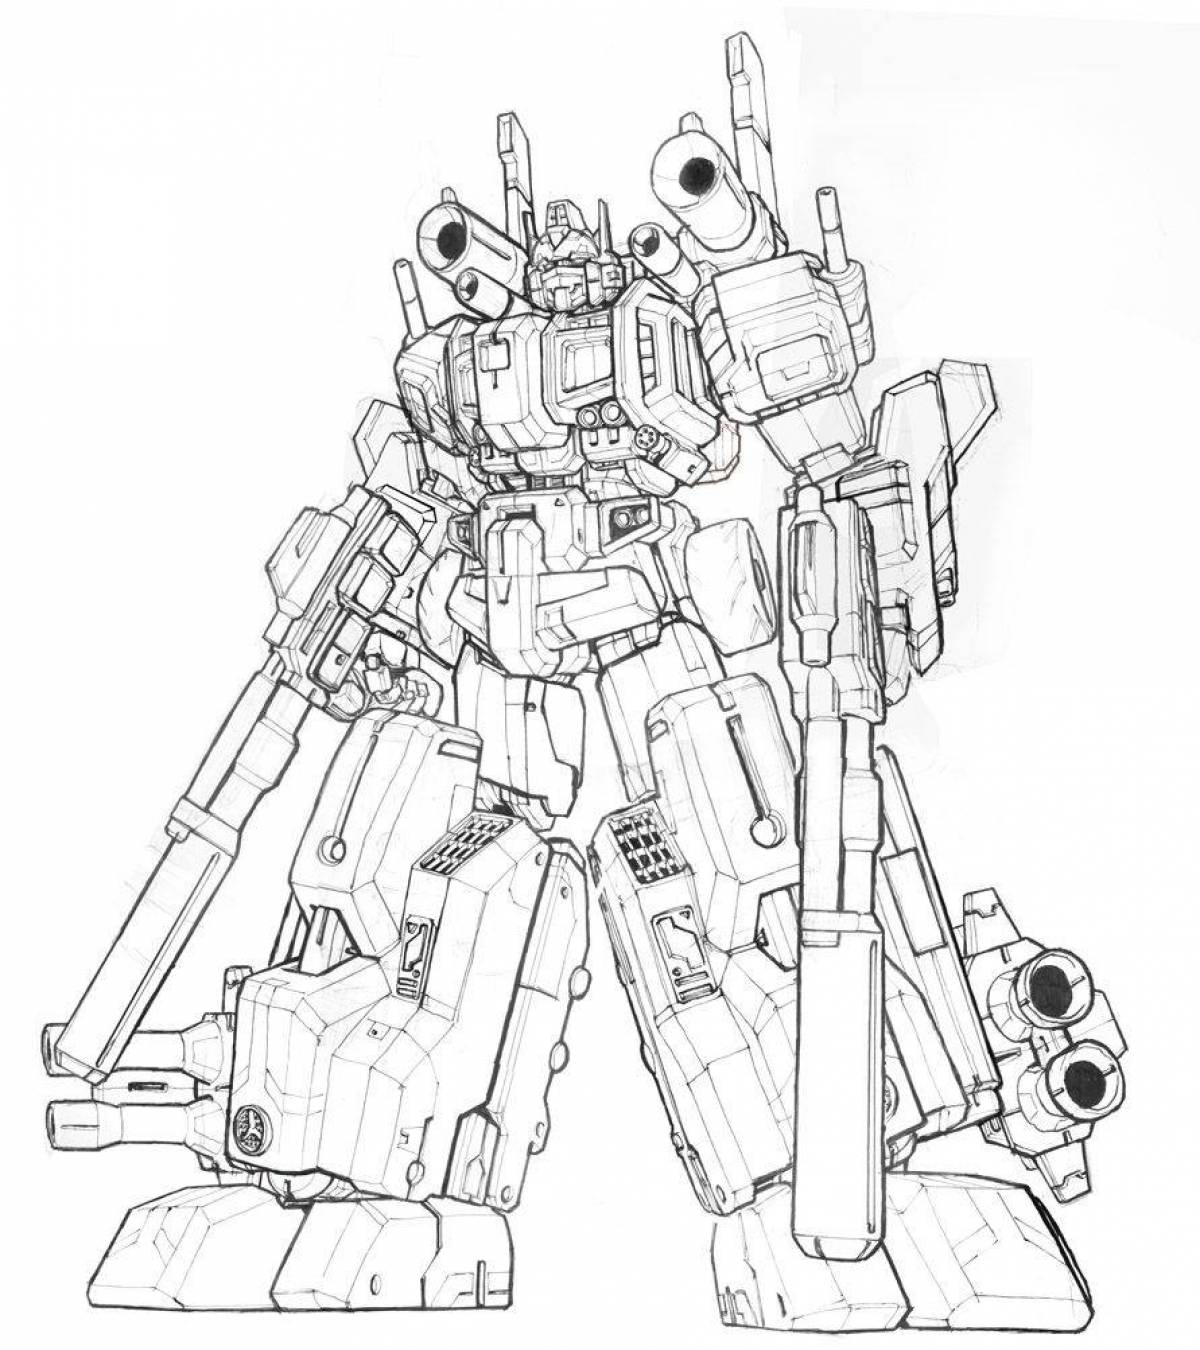 Coloring page energetic optimus prime for kids